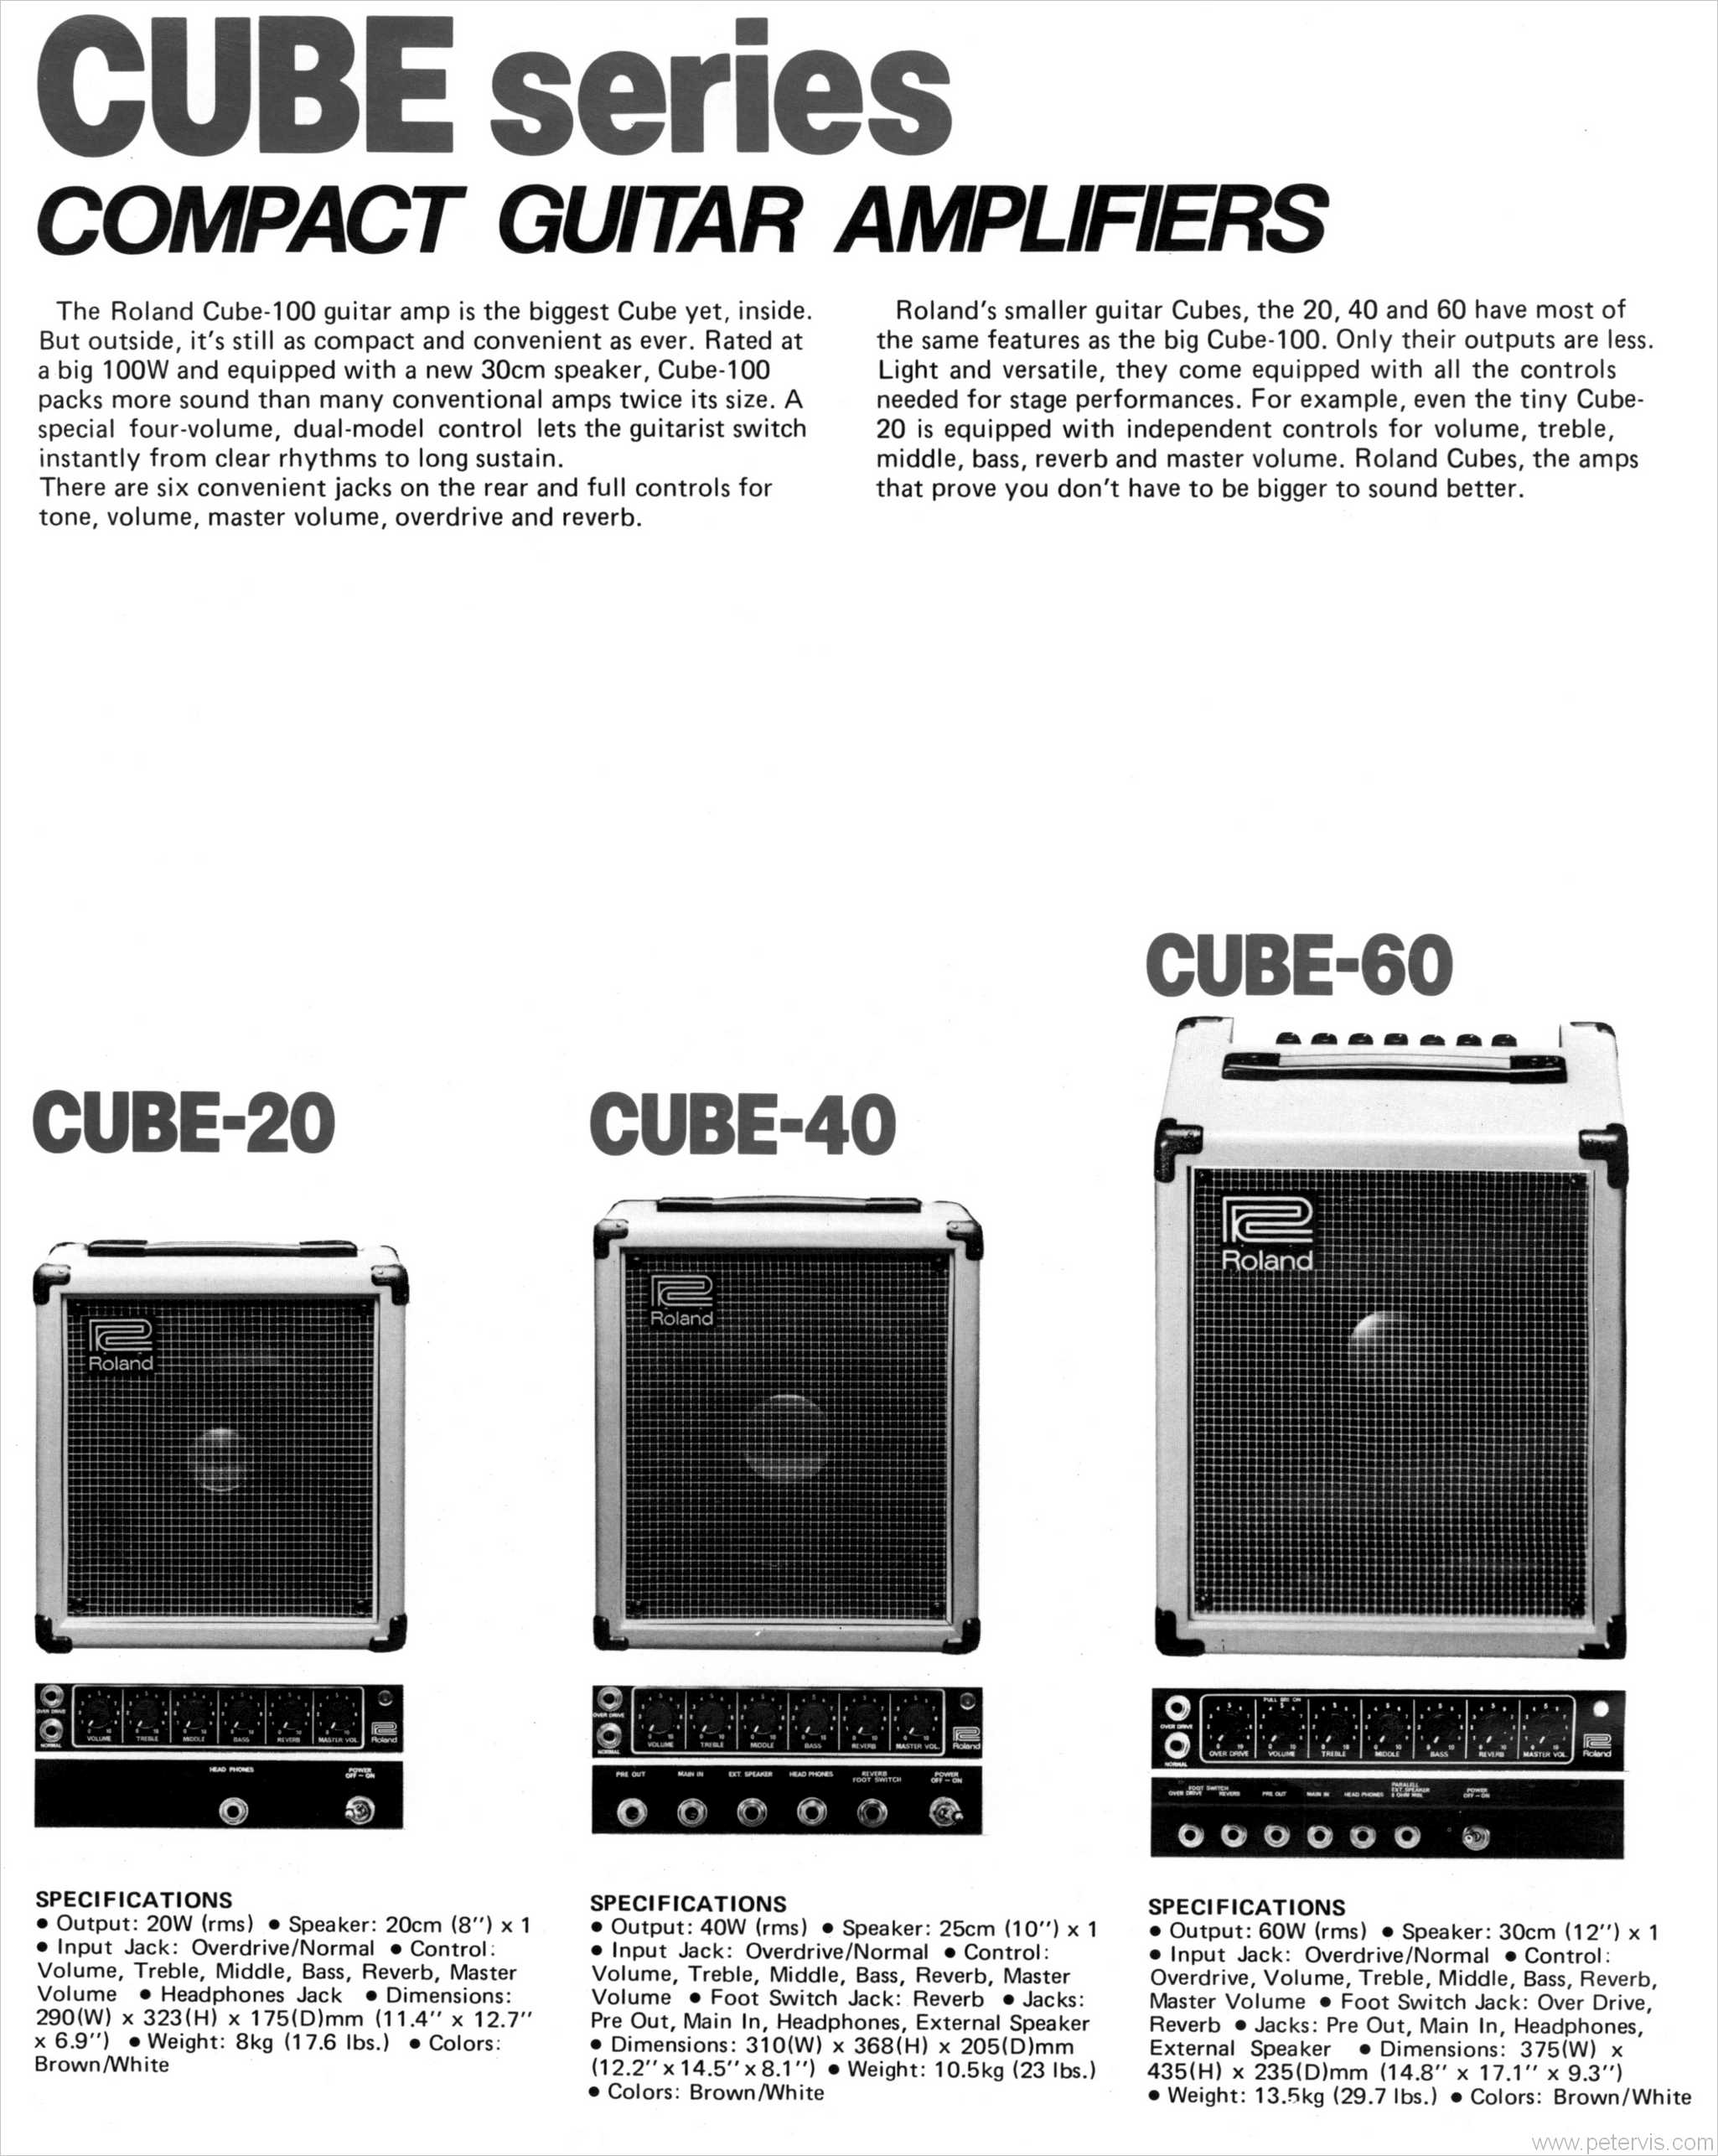 CUBE-20 AND CUBE-40 AND CUBE-60